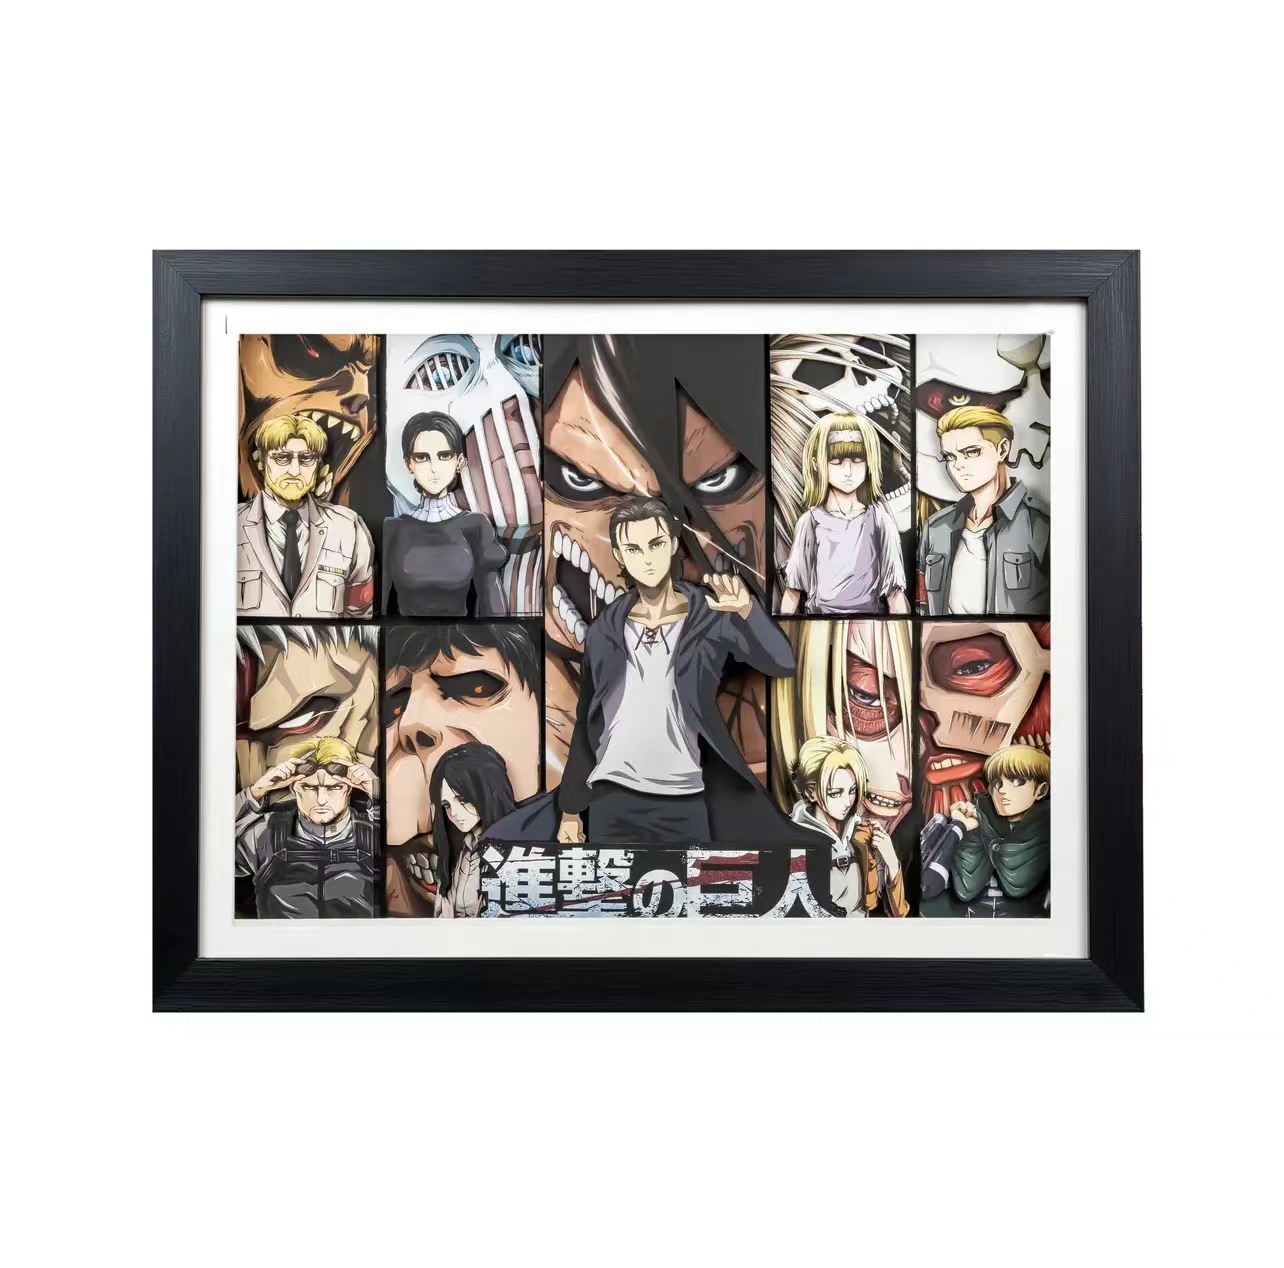 Attack on Titan anime 3D stereoscopic painting